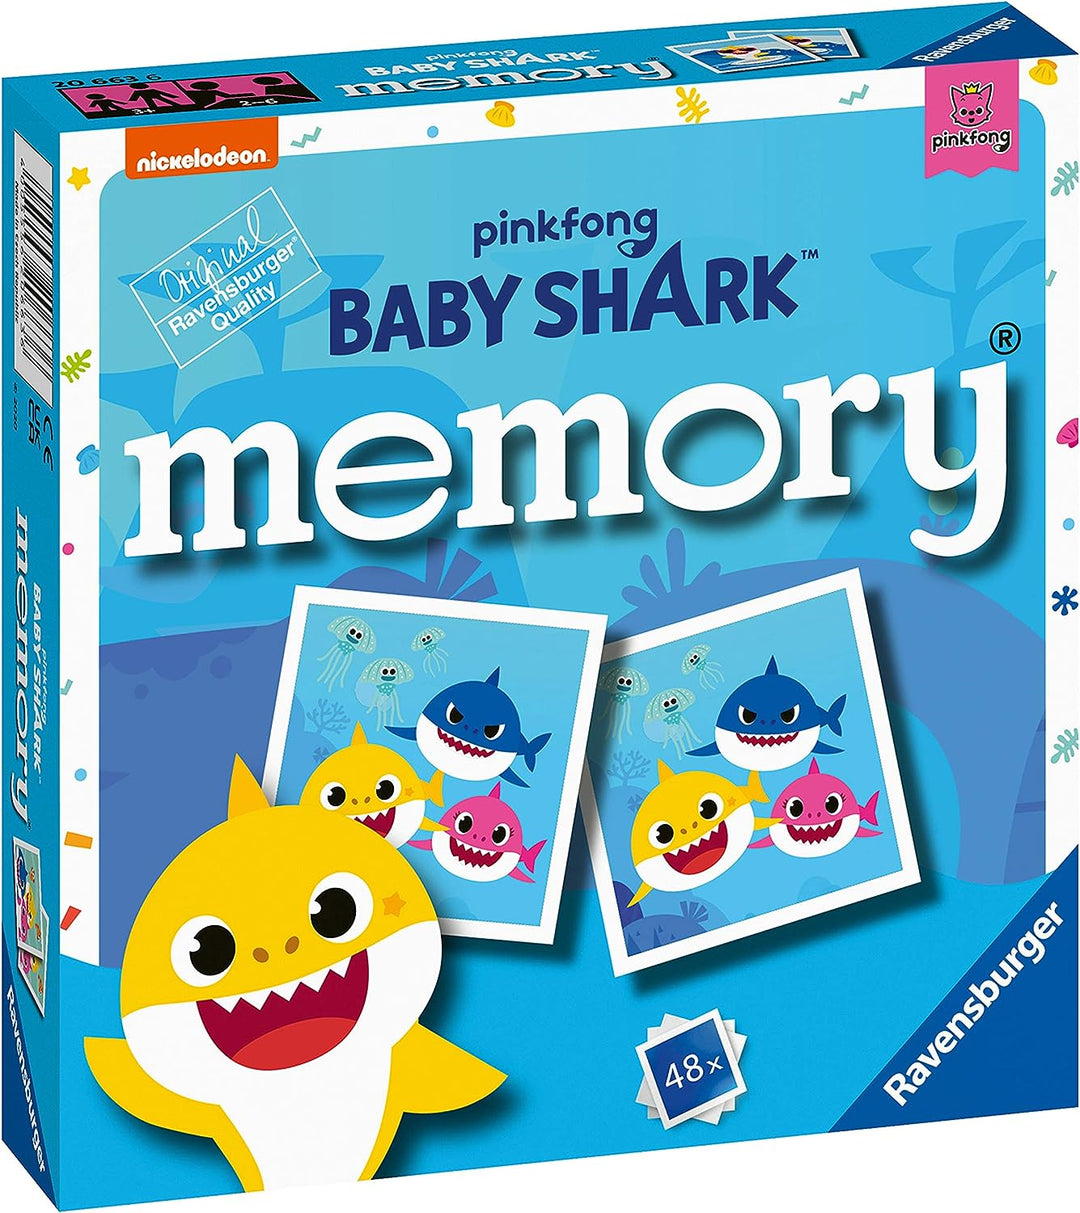 Ravensburger Baby Shark Mini Memory Game - Matching Picture Snap Pairs Game For Kids